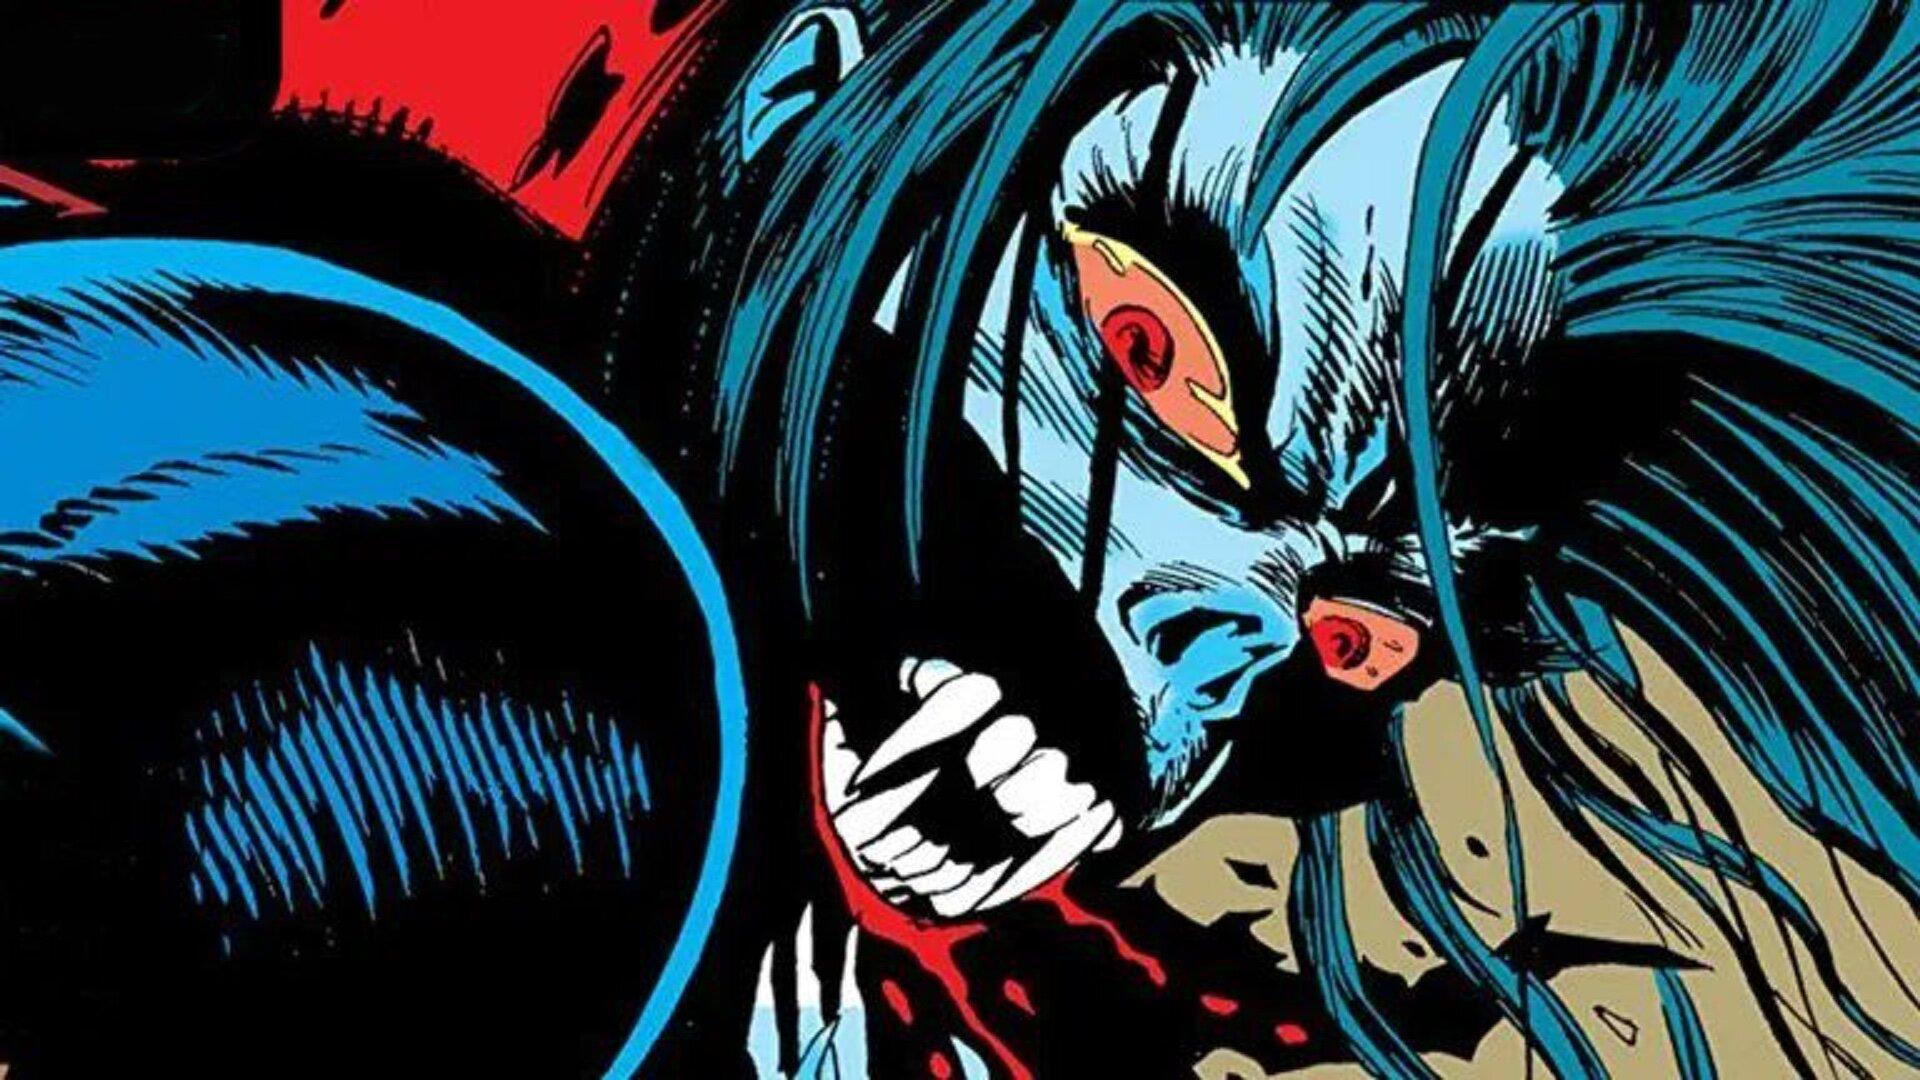 Crazy First Look at Jared Leto as MORBIUS THE LIVING VAMPIRE